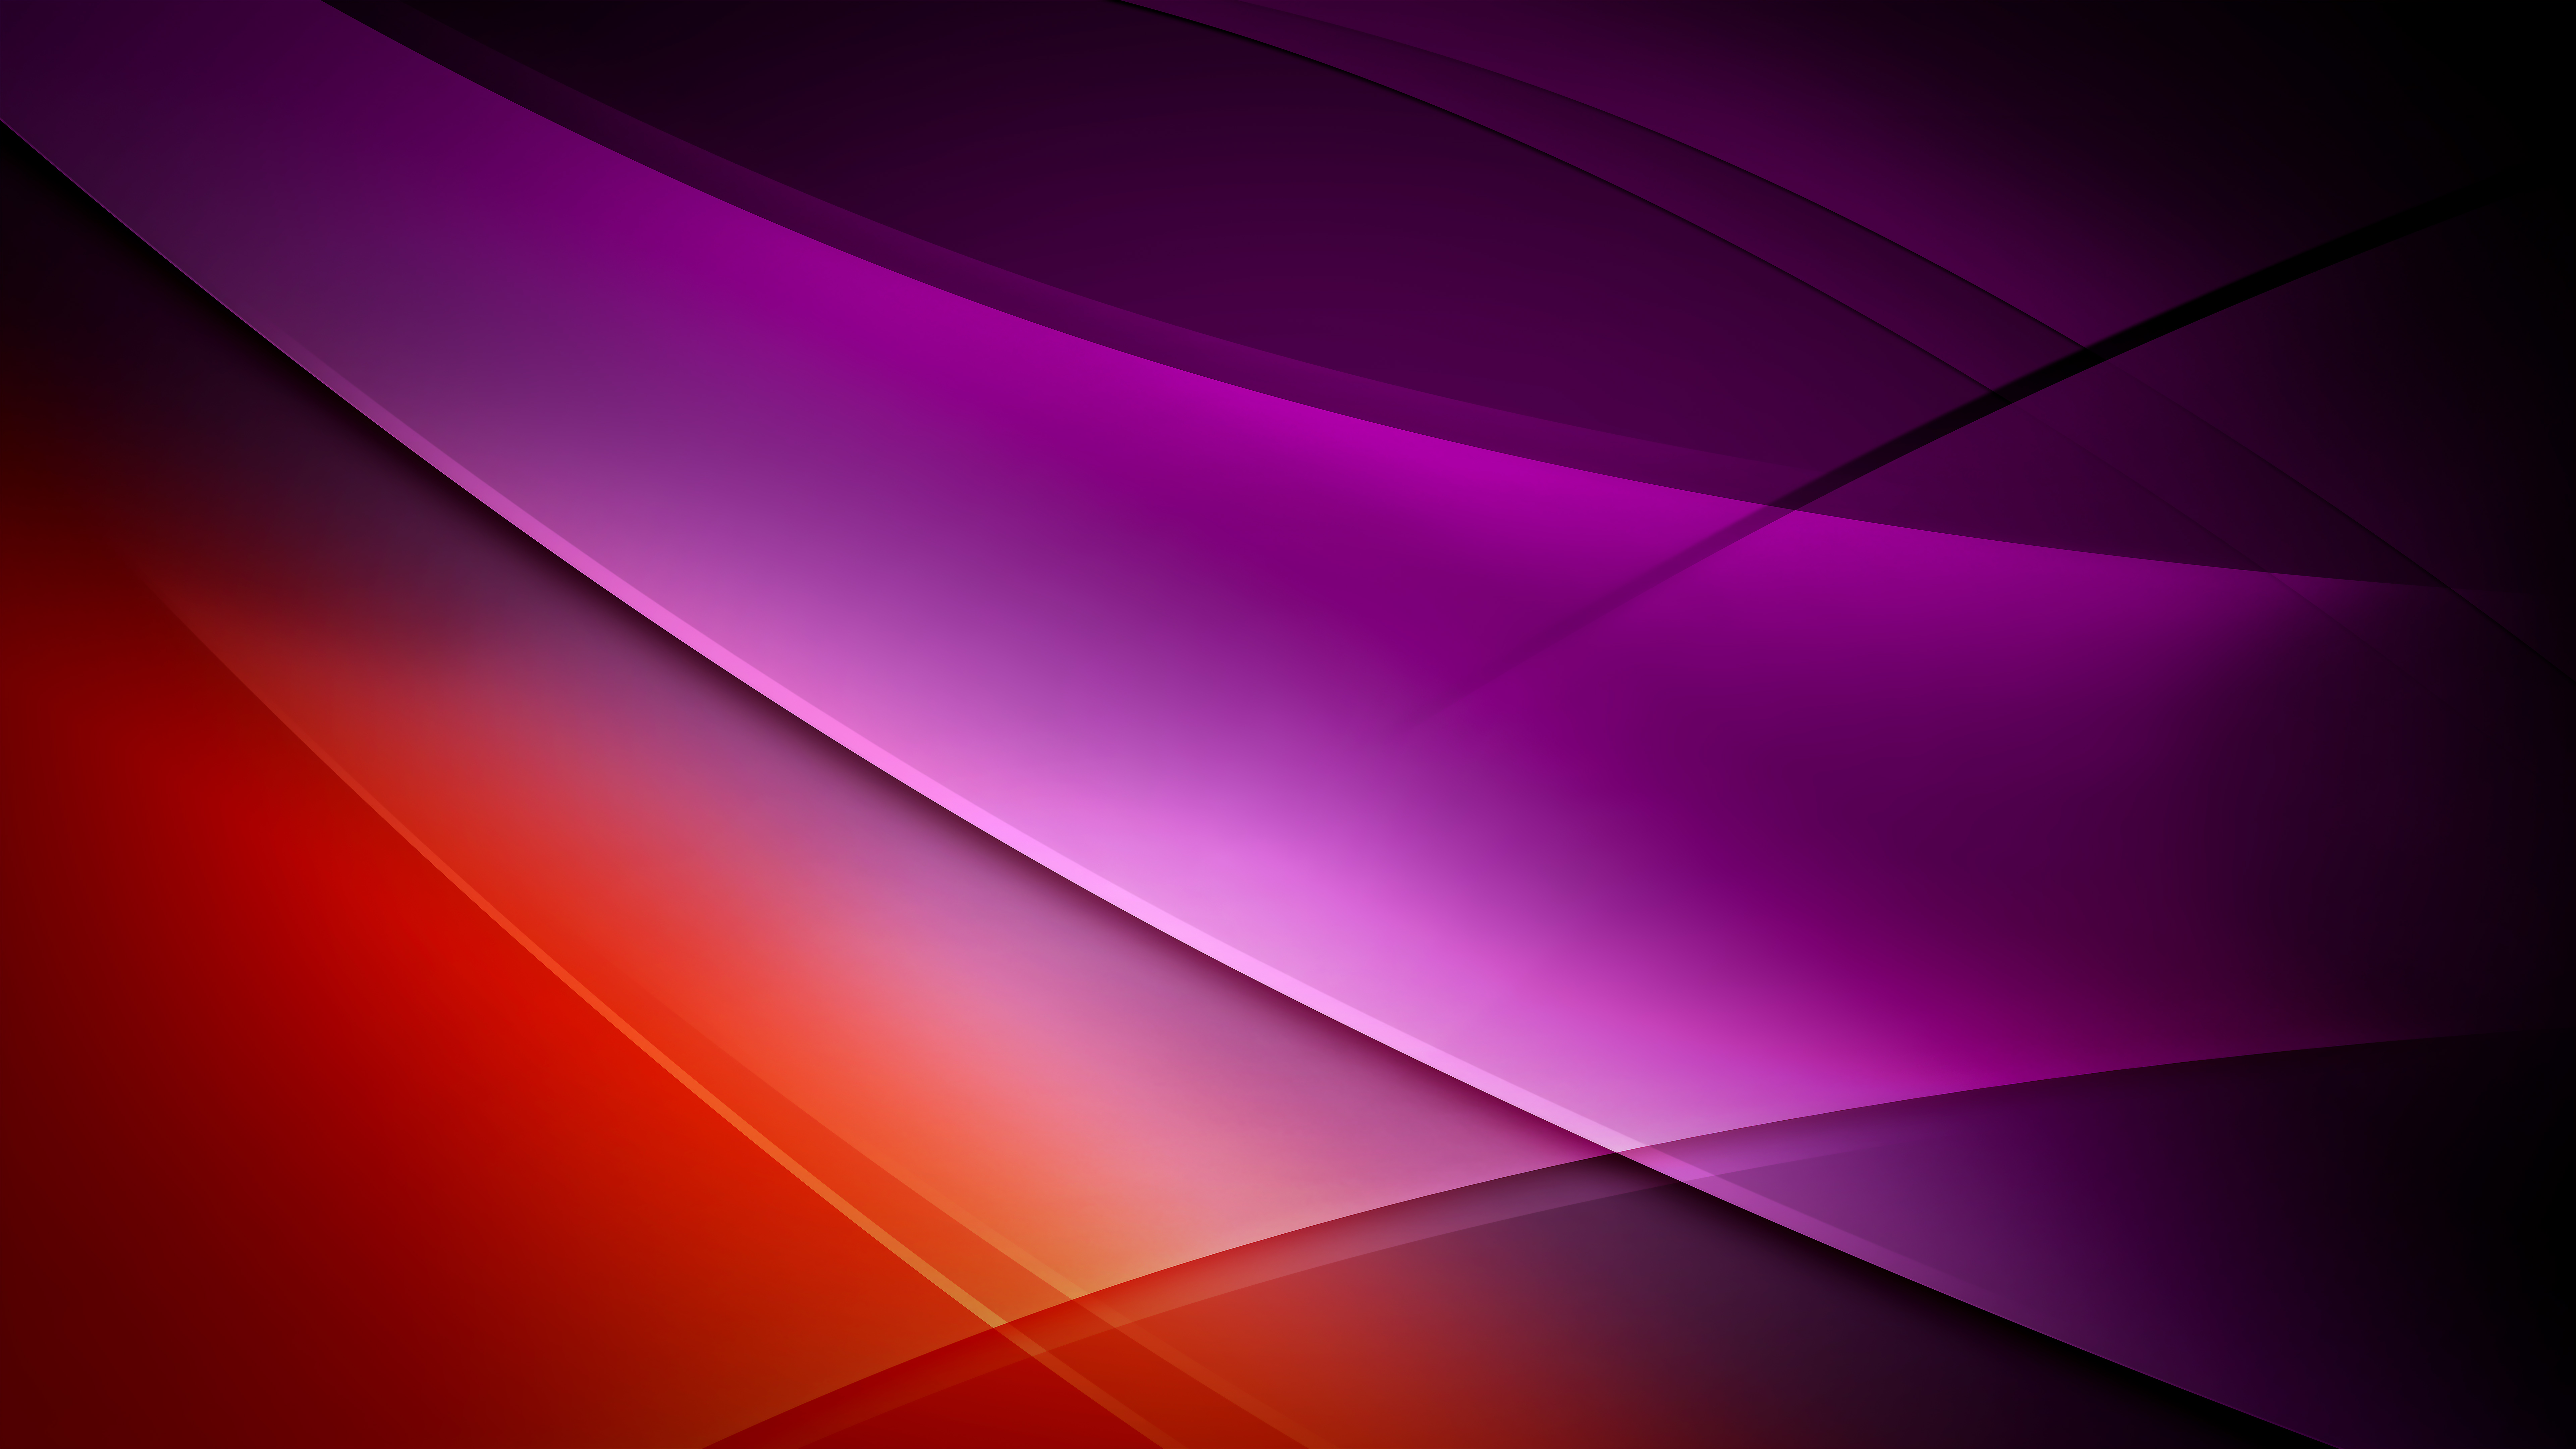 Shapes and lines in red and purple Wallpaper 8k Ultra HD